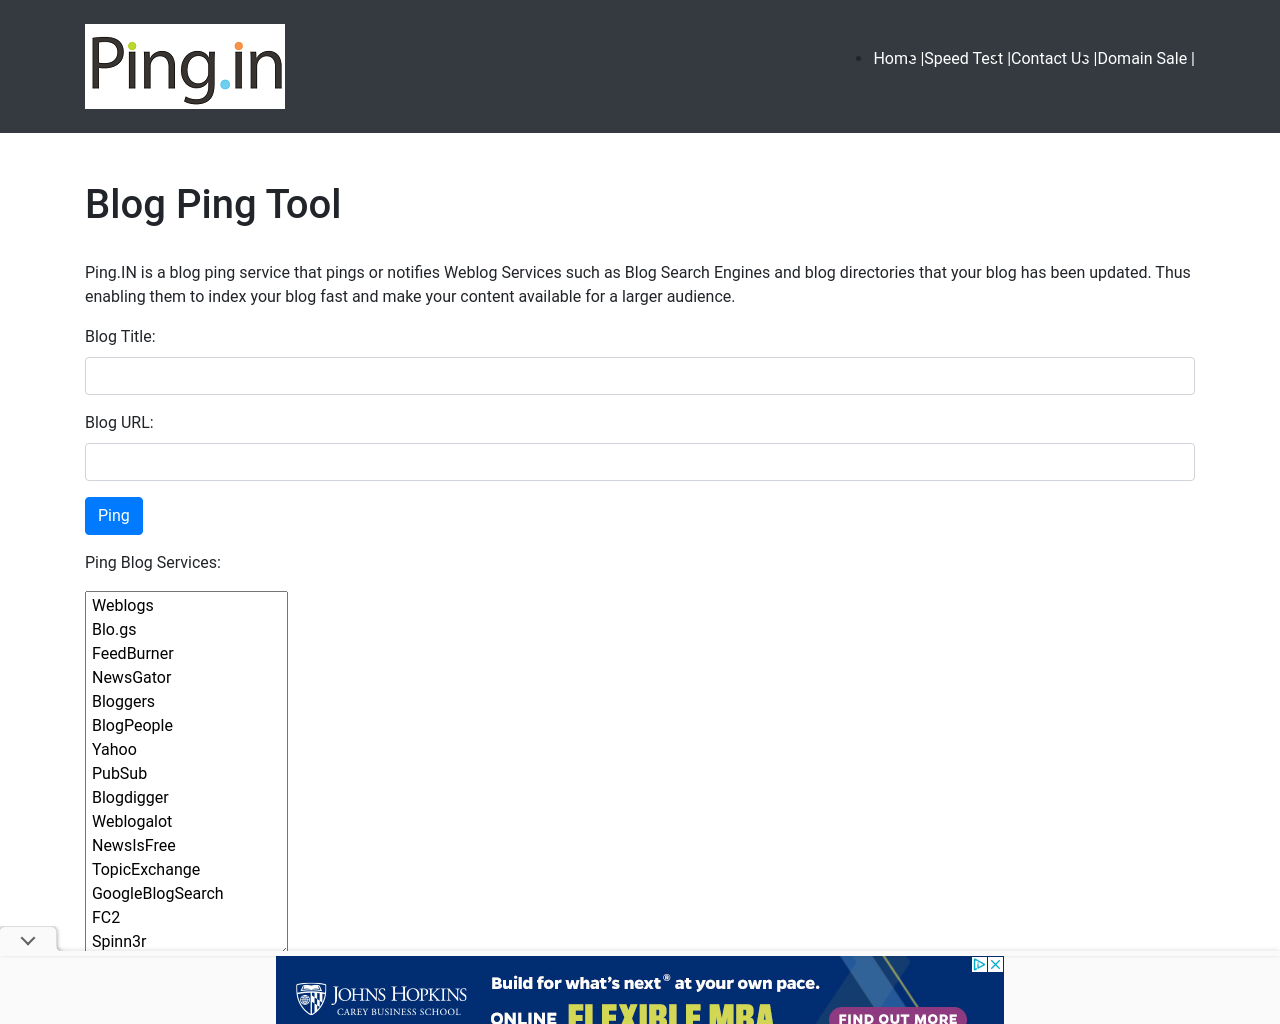 ping.in